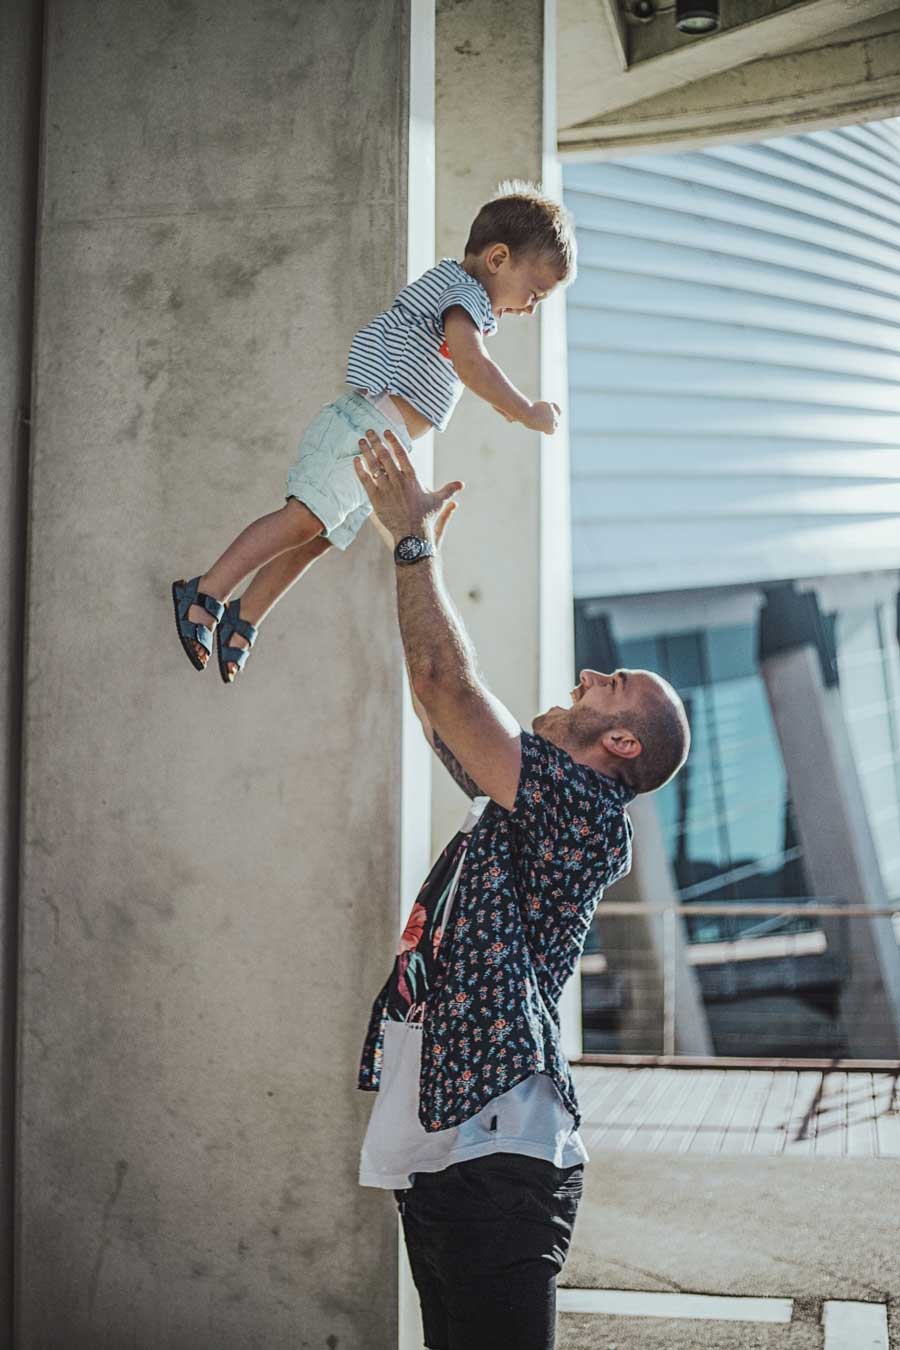 son trusting his dad to throw him up into the air